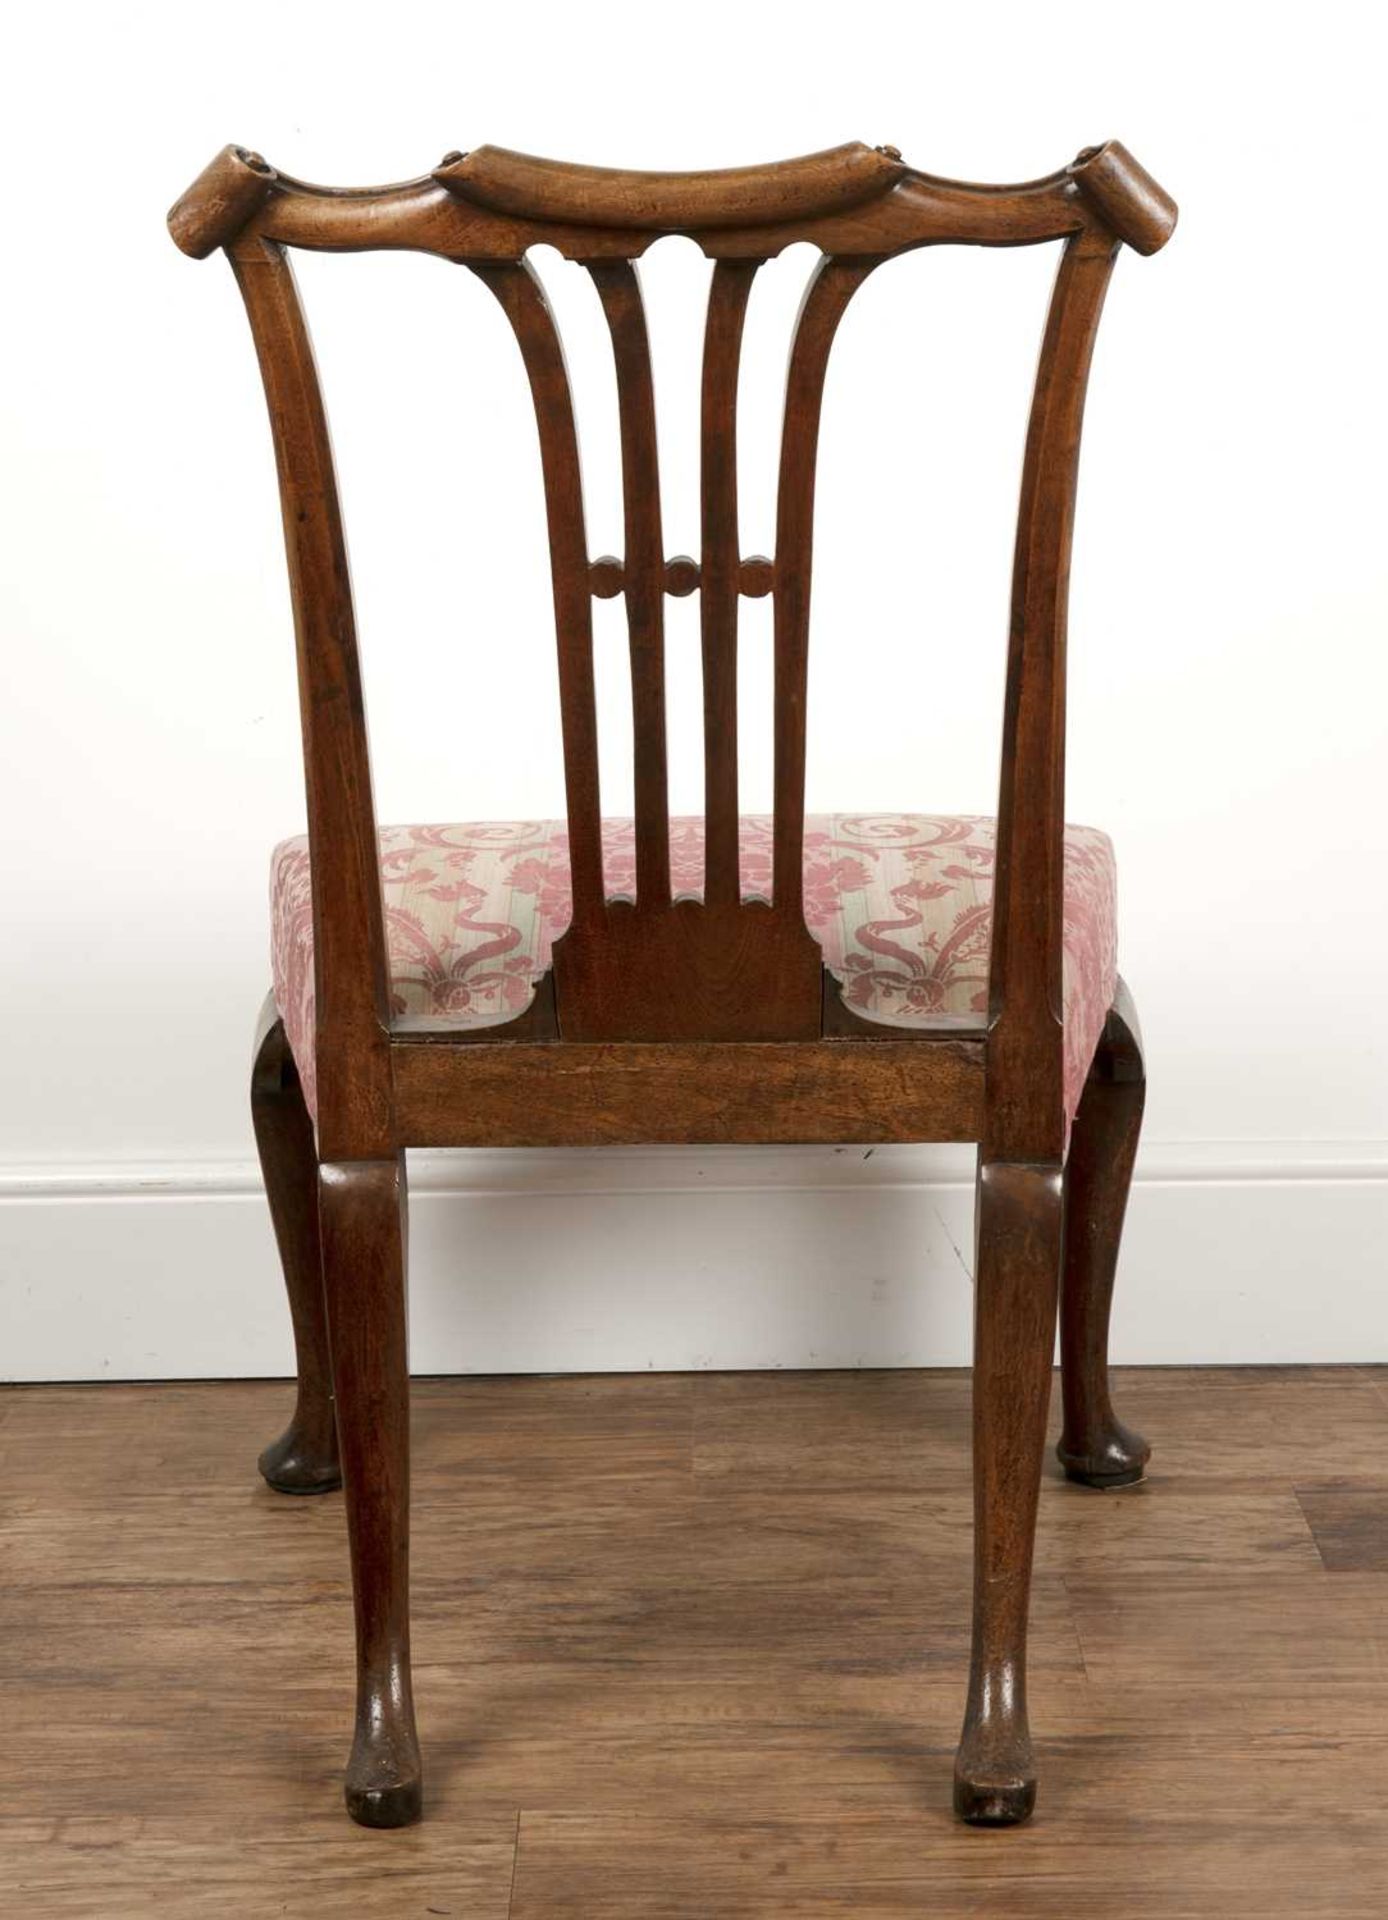 Mahogany side chair 18th Century, with a splat back and reupholstered seat, 60cm wide x 97cm high - Bild 4 aus 4